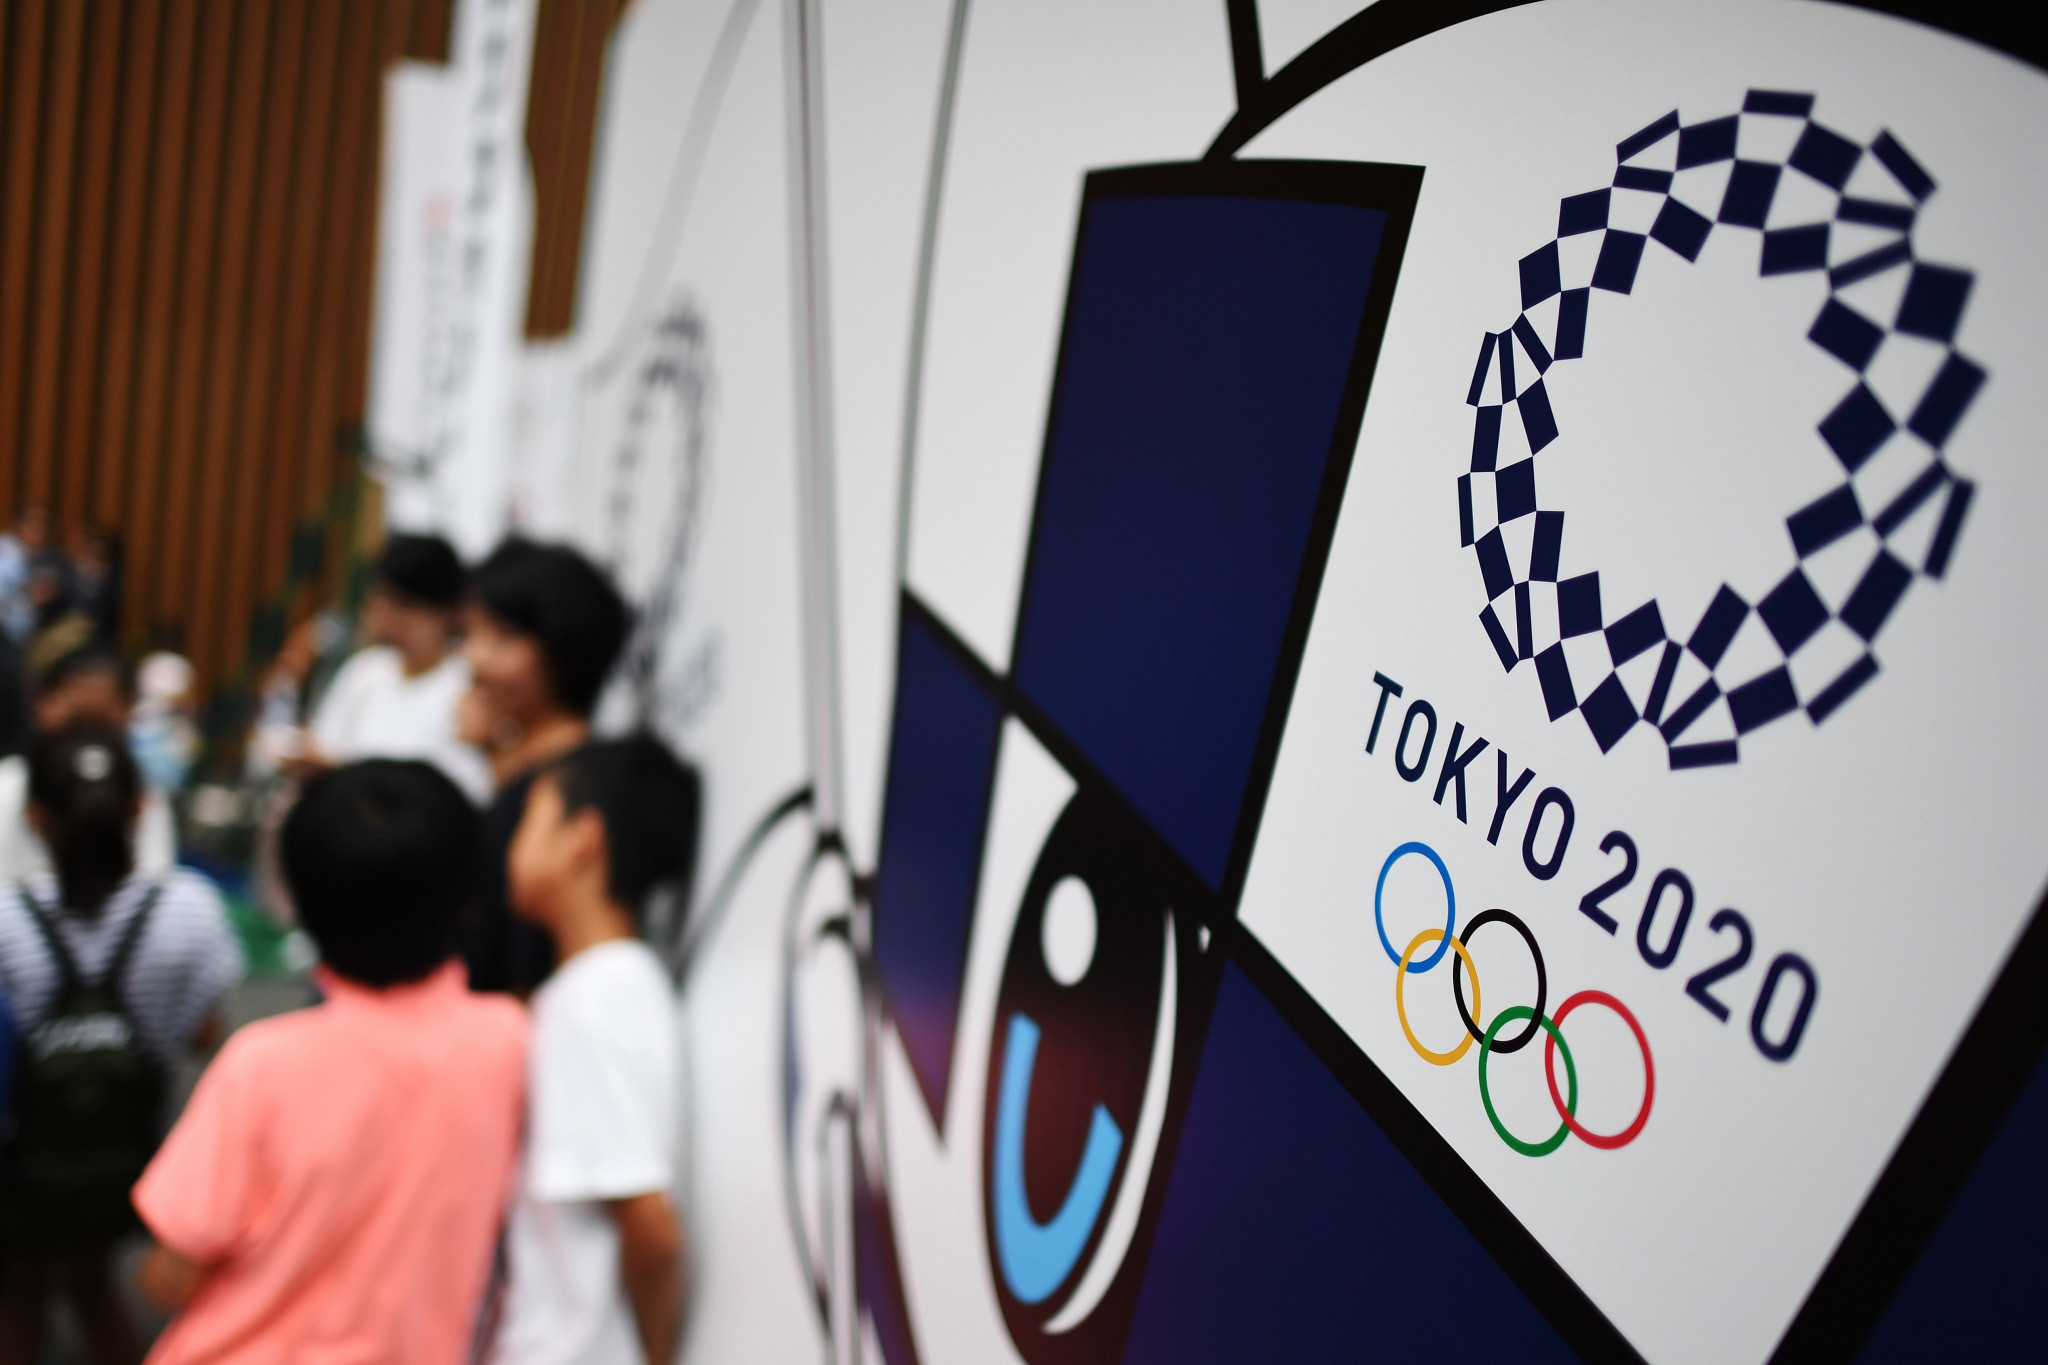 Tokyo 2020 has now secured 65 domestic sponsors ©Getty Images